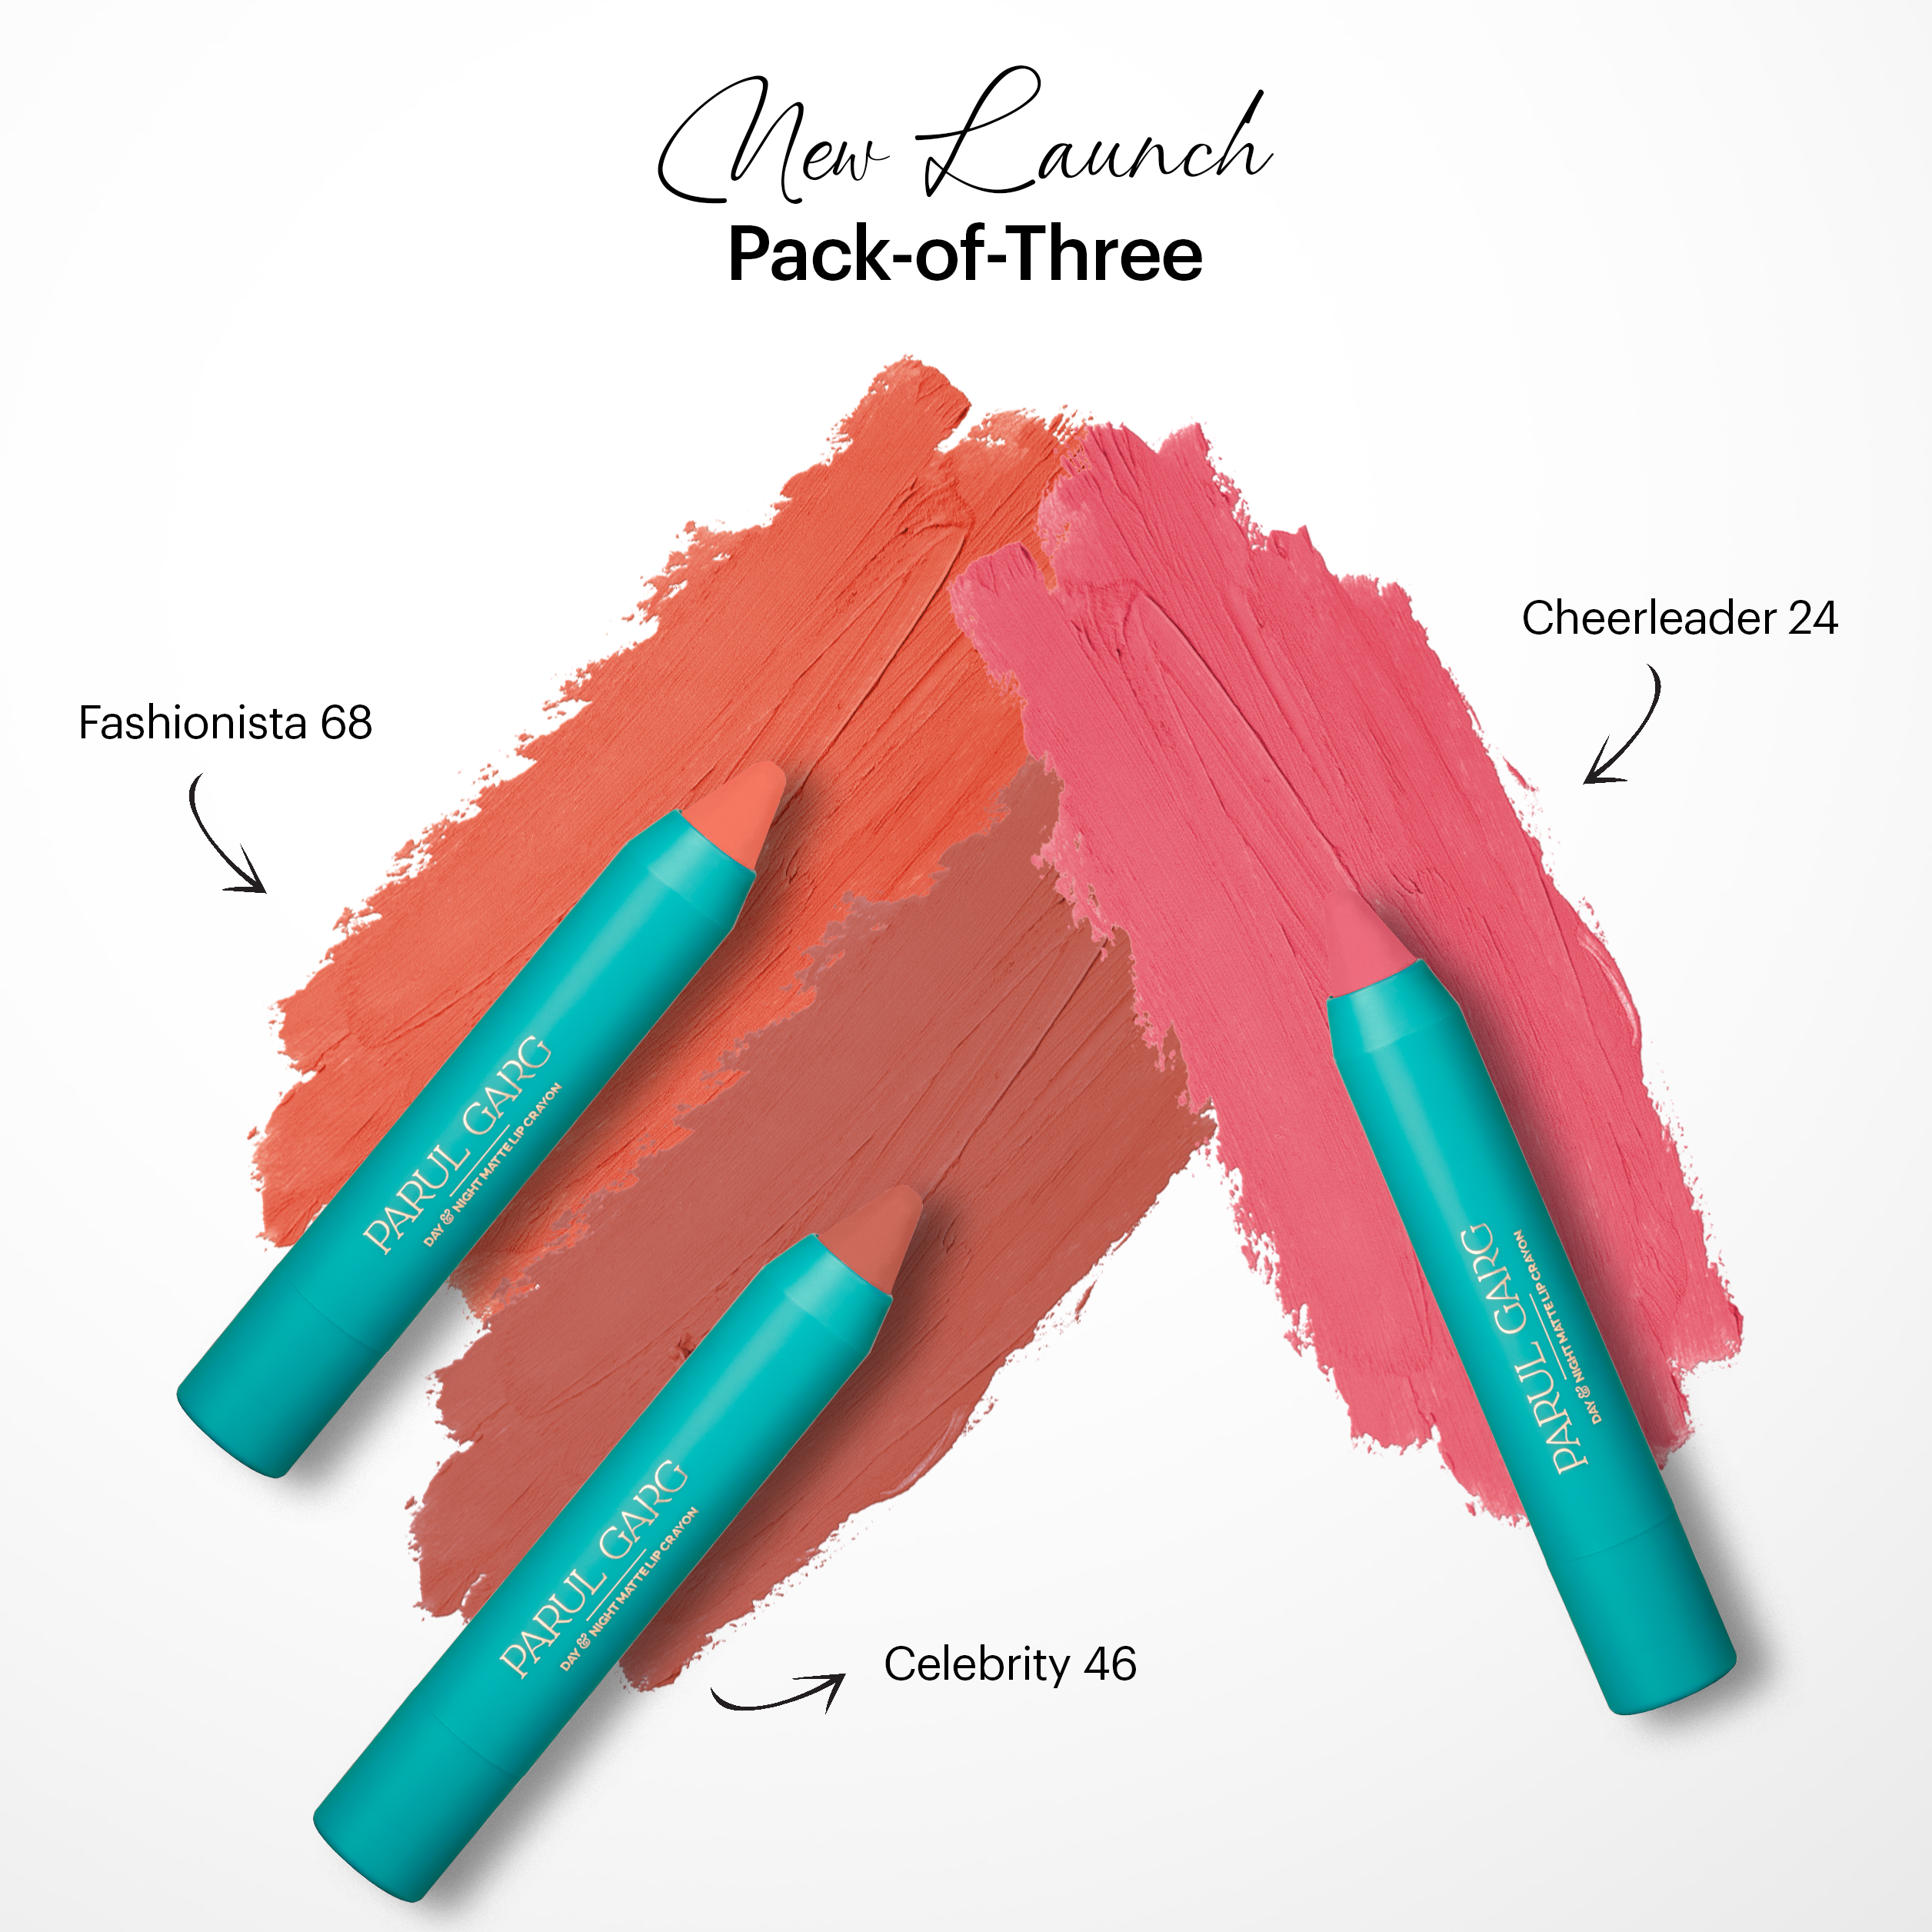 New Launch Pack-of-Three Lip Crayons